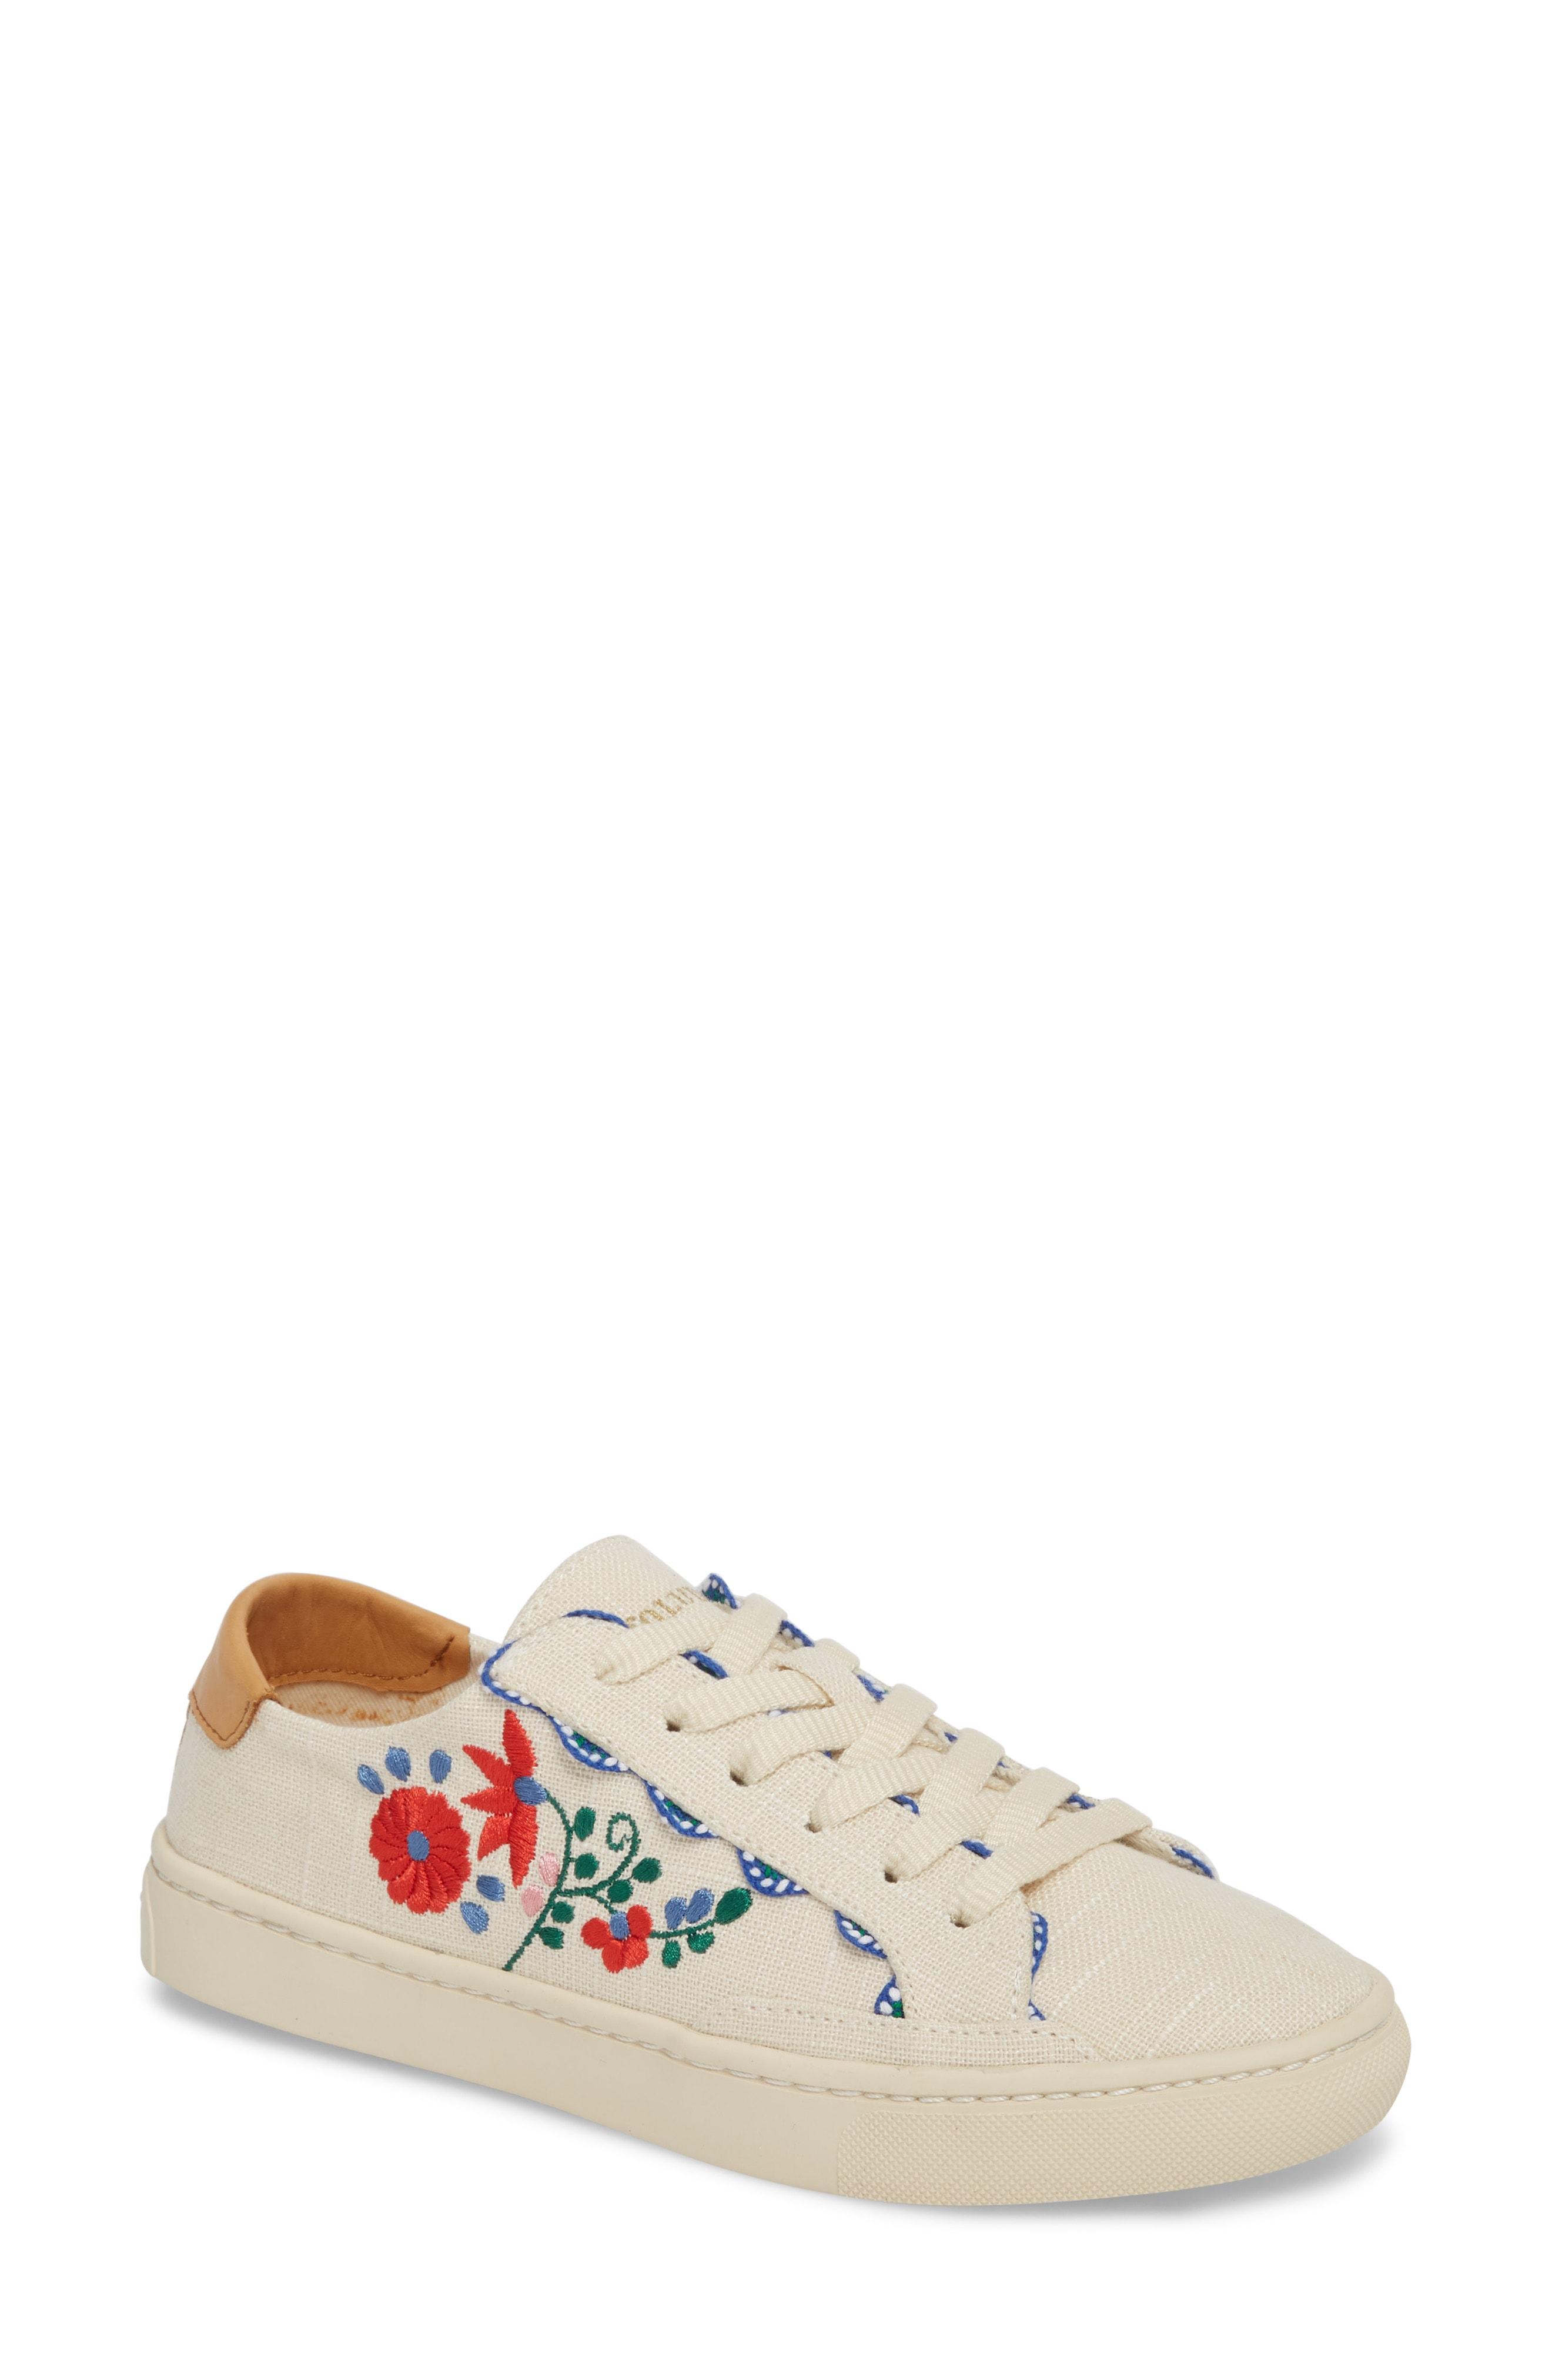 Soludos Ibiza Embroidered Sneakers In Beige | ModeSens